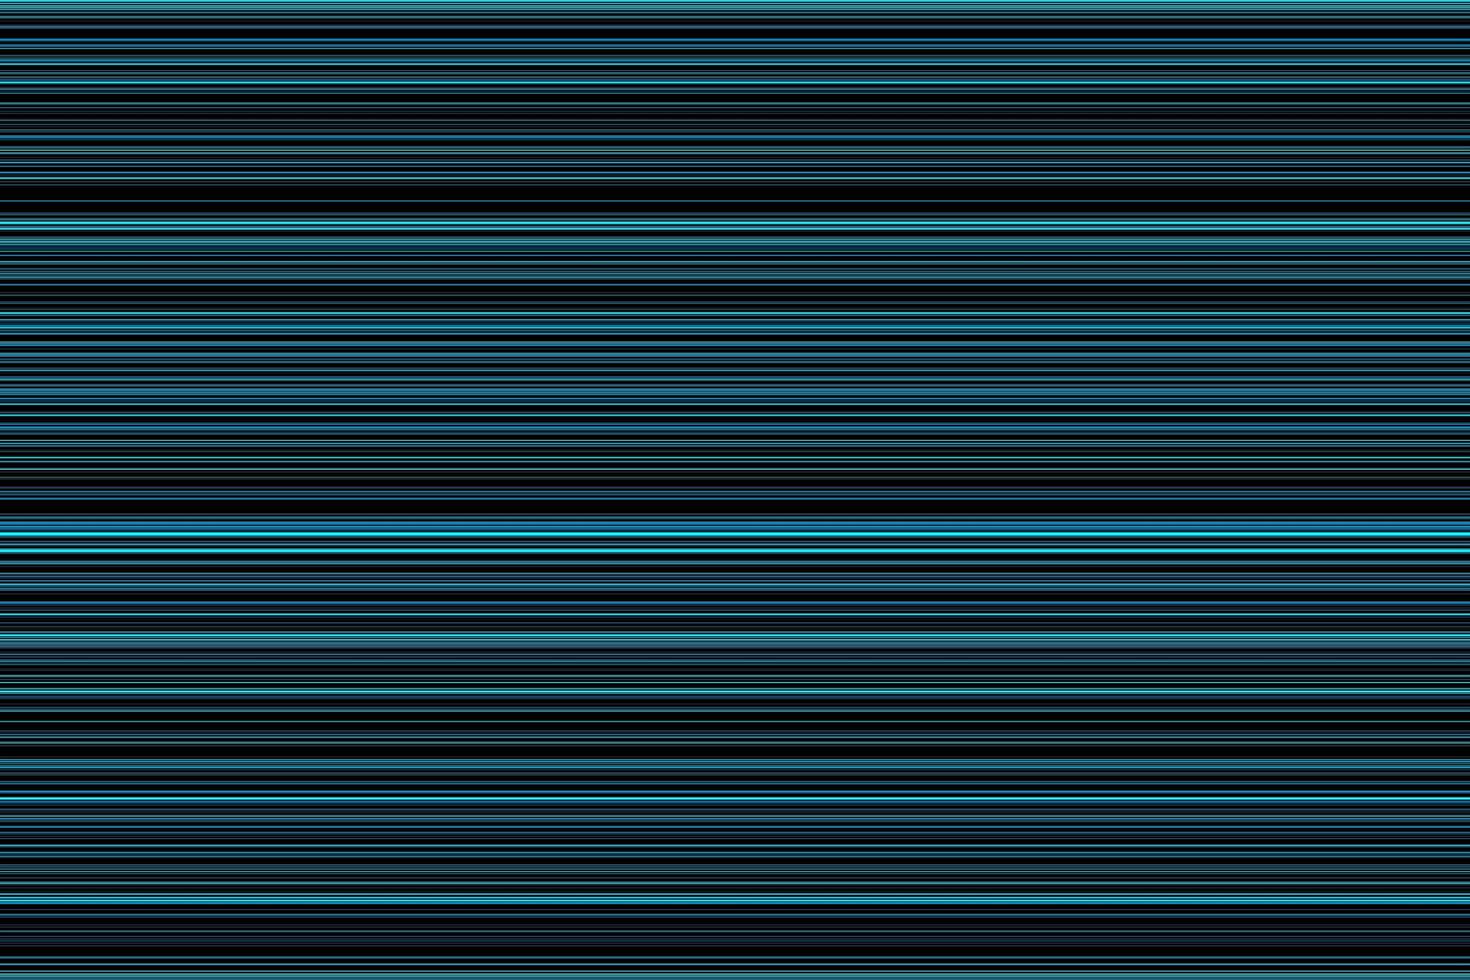 Blue digital sound wave horizontal pattern or speed lines, abstract background photo